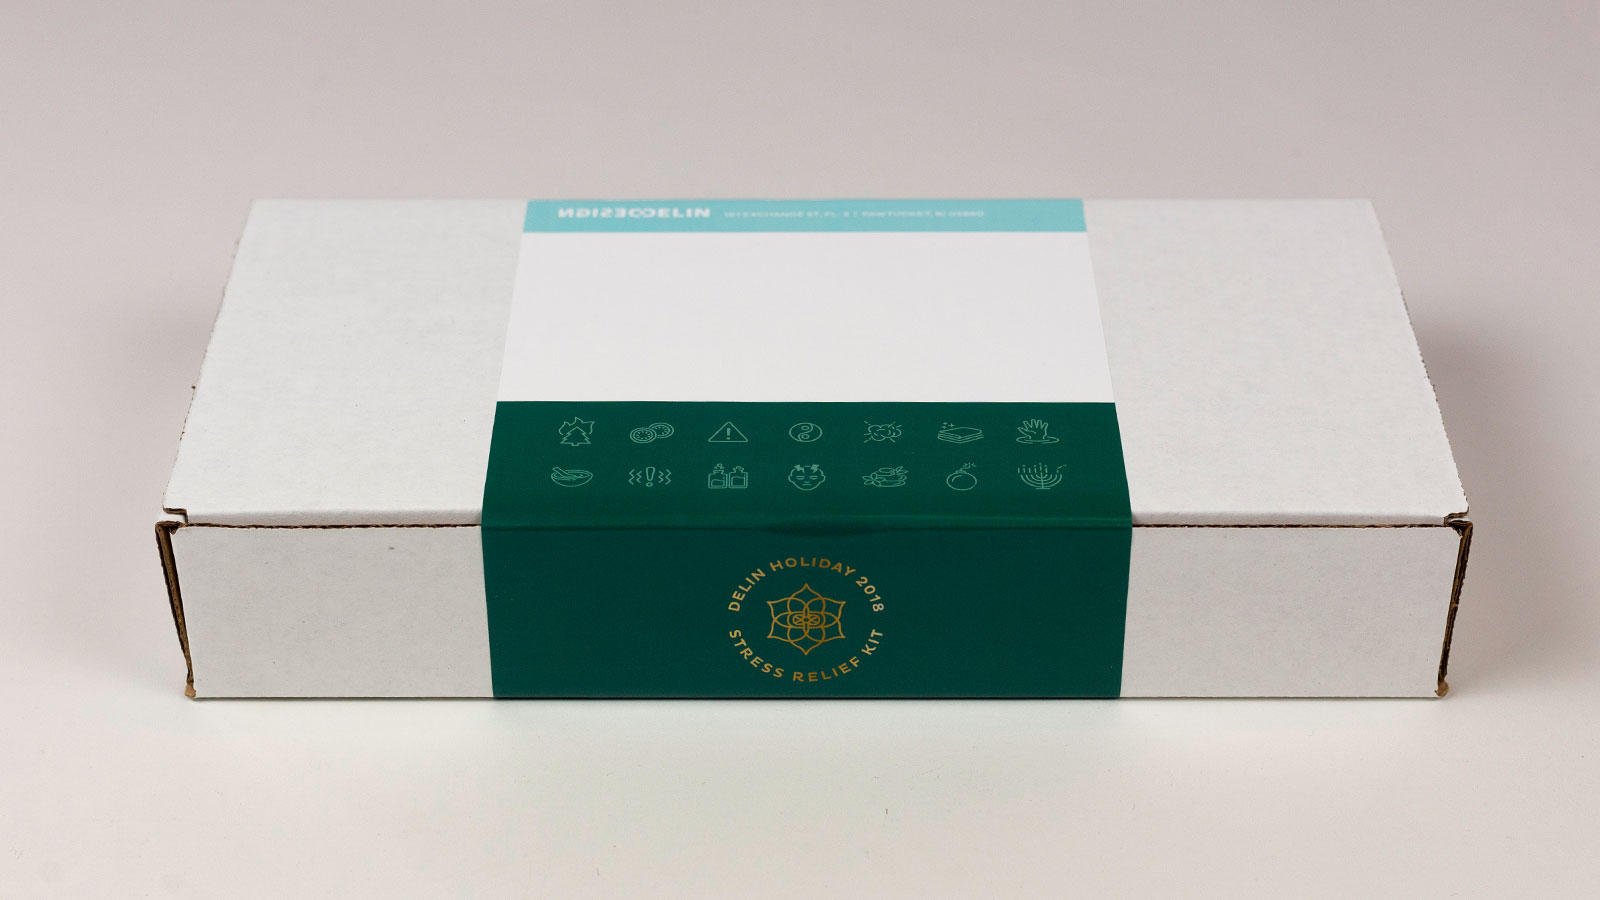 Delin Design Holiday 2018 Stress Kit Direct-Mail Promotion: Box Exterior Top